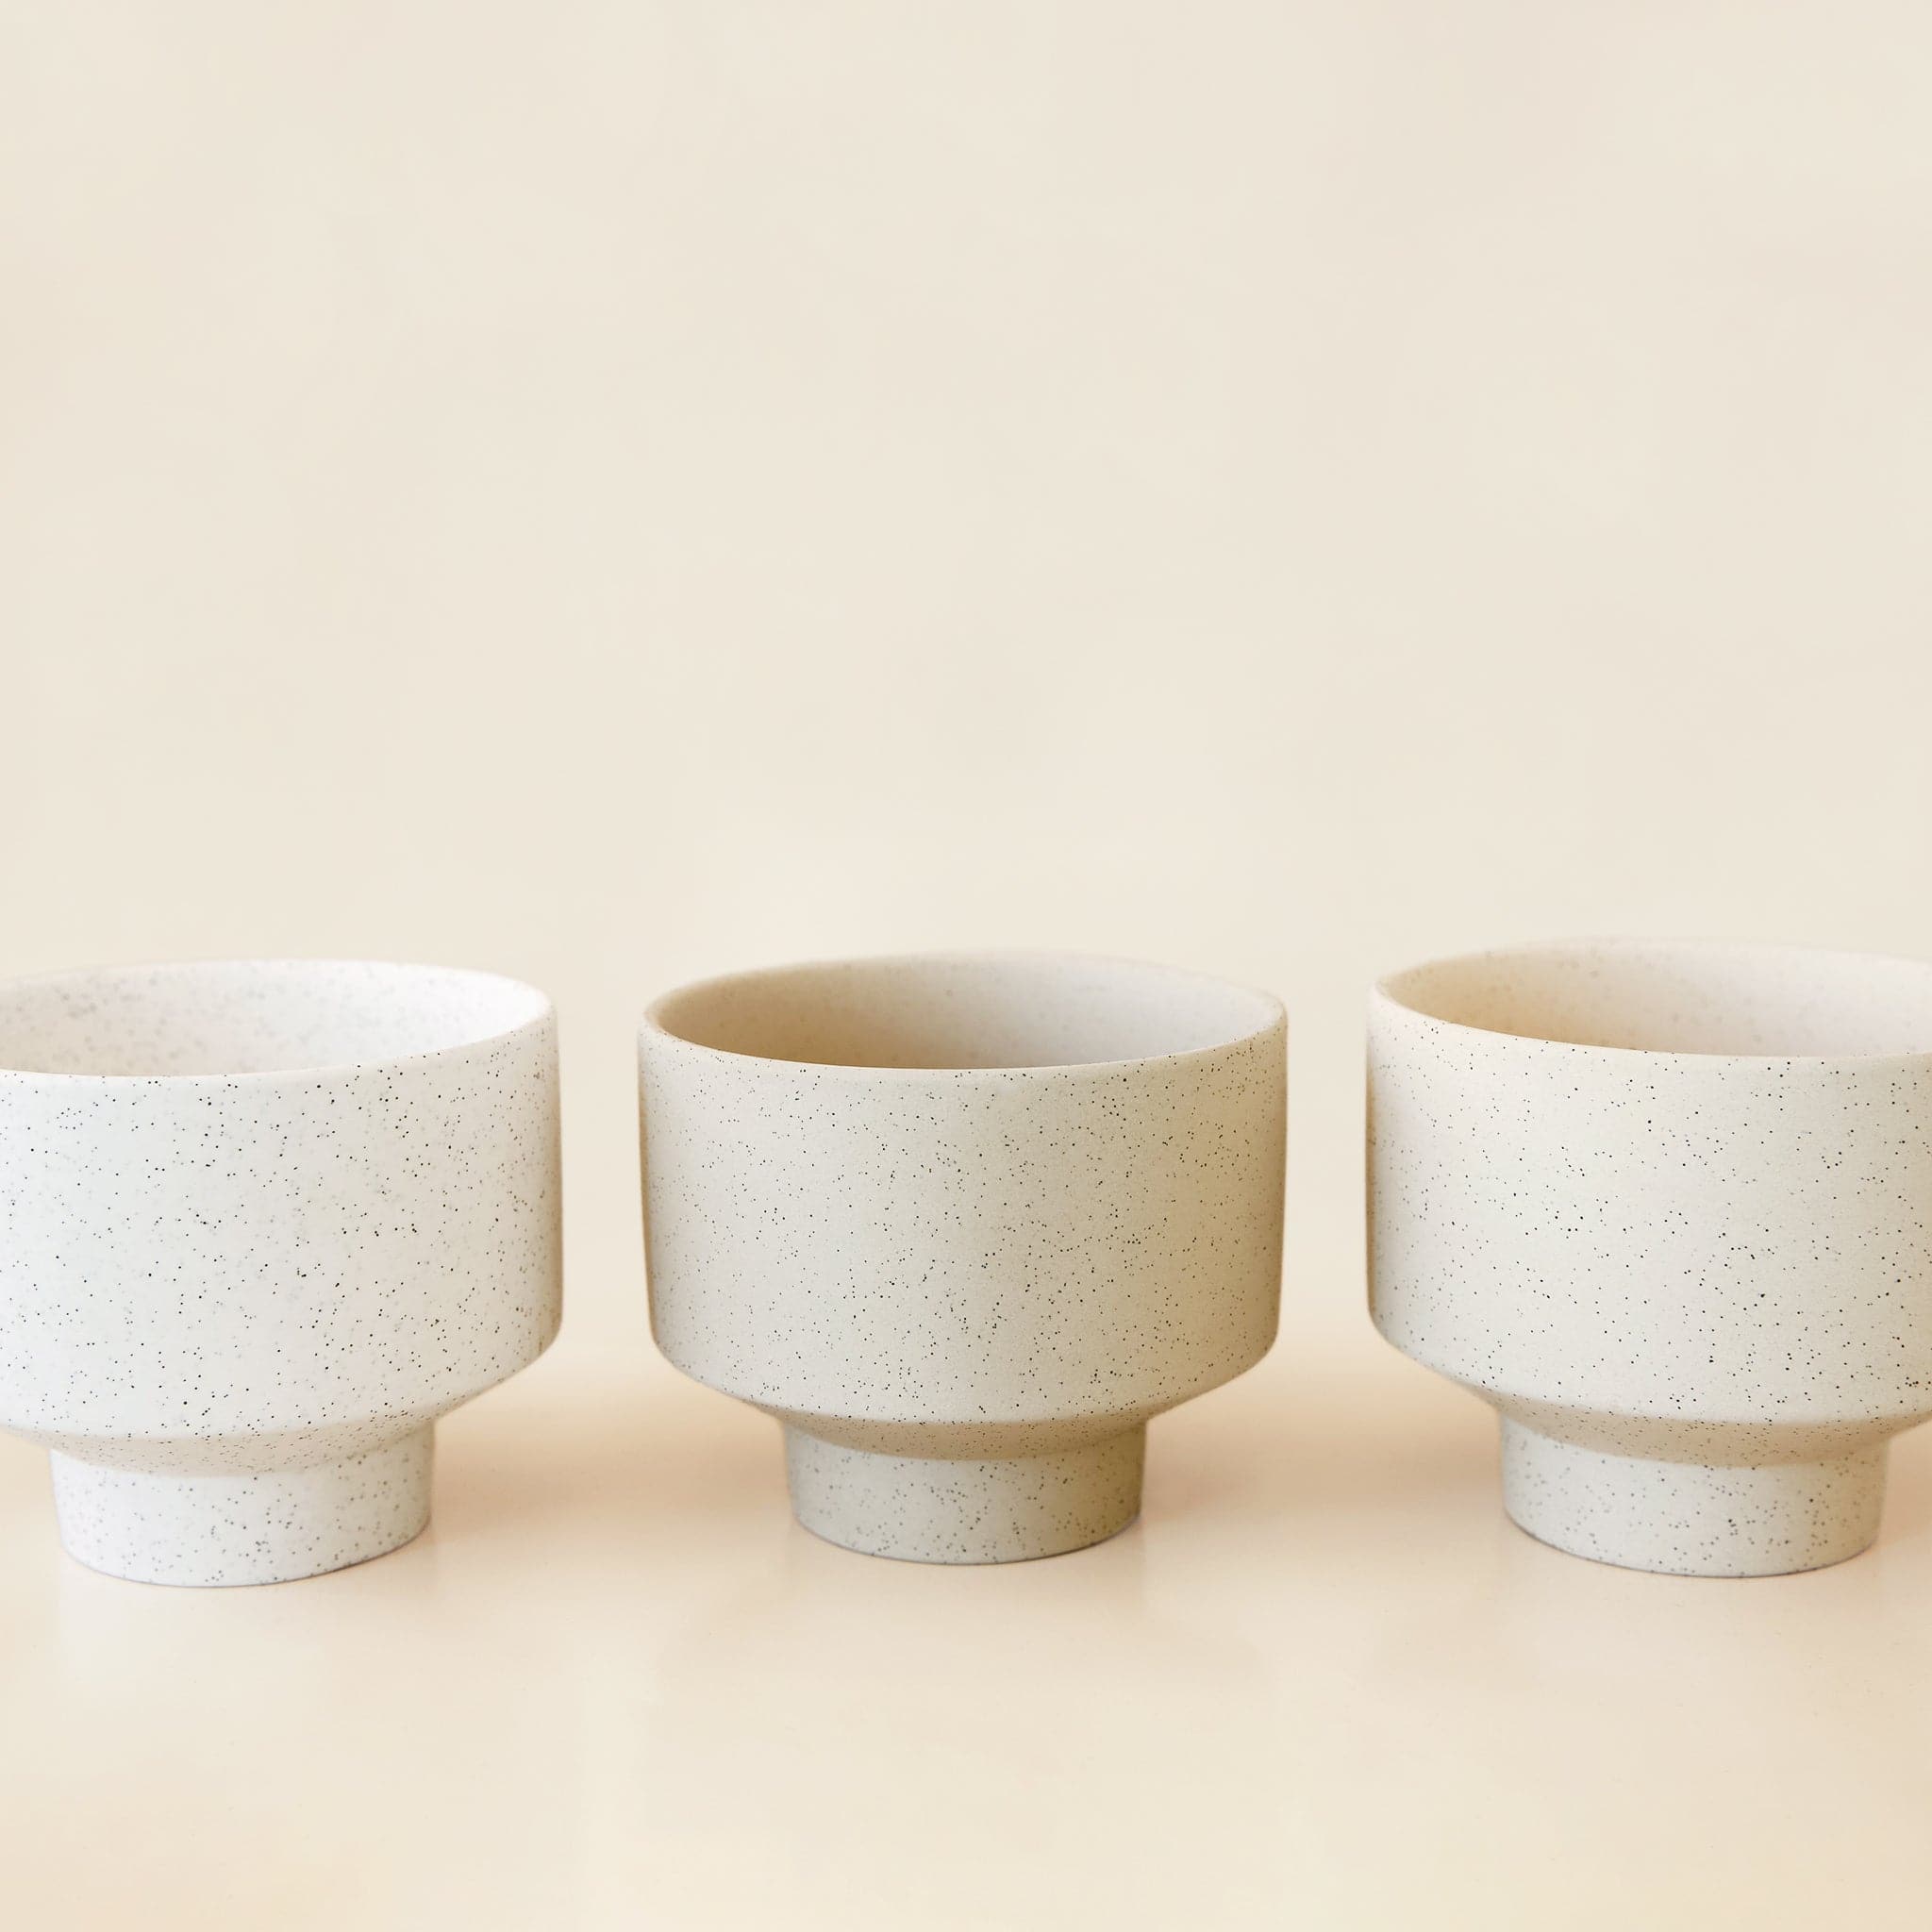 In front of a tan background is three round, ceramic dove pots with a tapered bottom. The pots have black speckles.